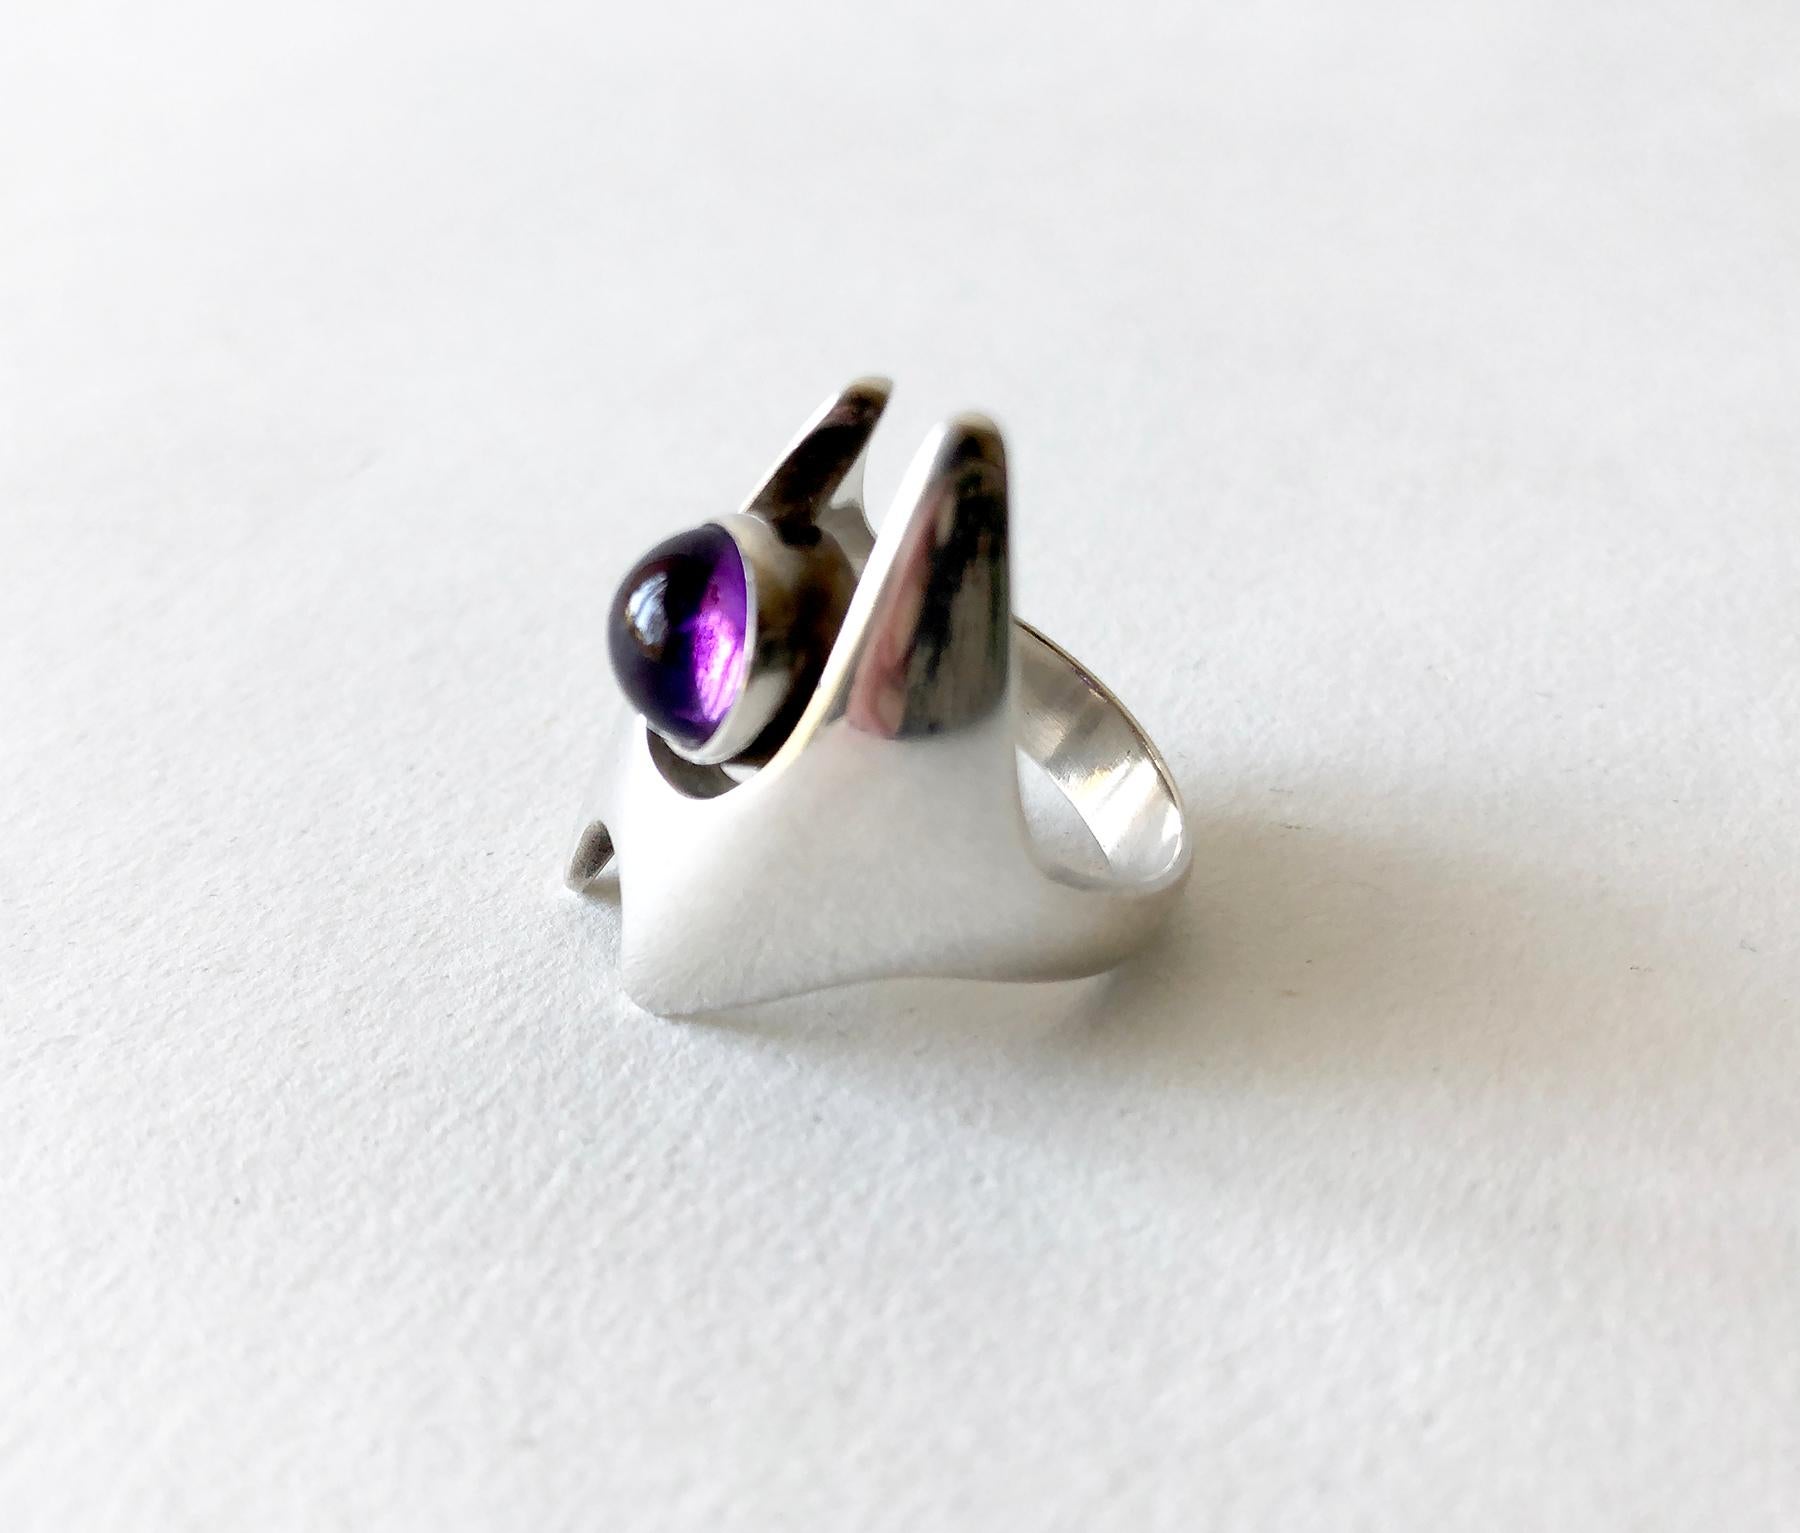 1960s Danish modernist sterling silver and amethyst cabochon ring created by Henning Koppel for Georg Jensen.  Ring is a finger size 7.5 and is signed Georg Jensen, 925, 139, Denmark.  In very good vintage condition.